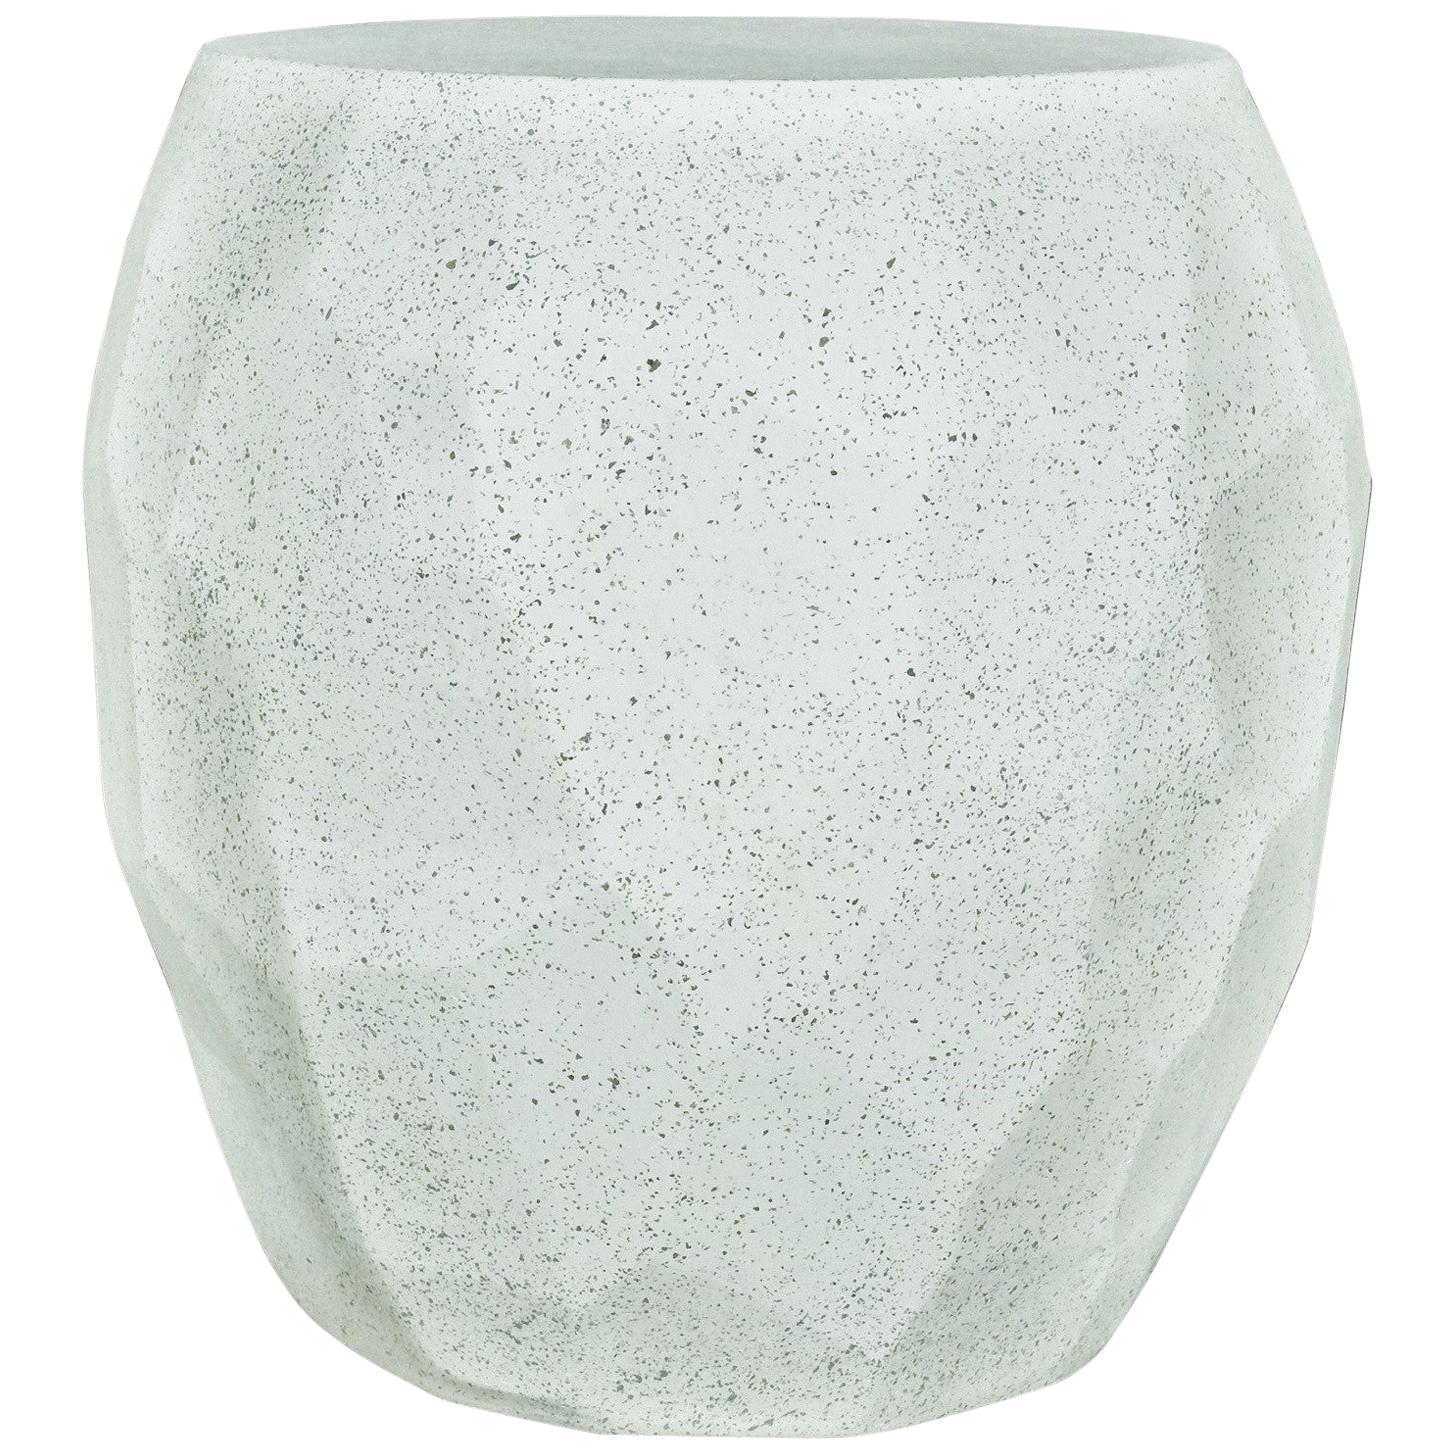 Cast Resin 'Facet' Side Table, Natural Stone Finish by Zachary A. Design